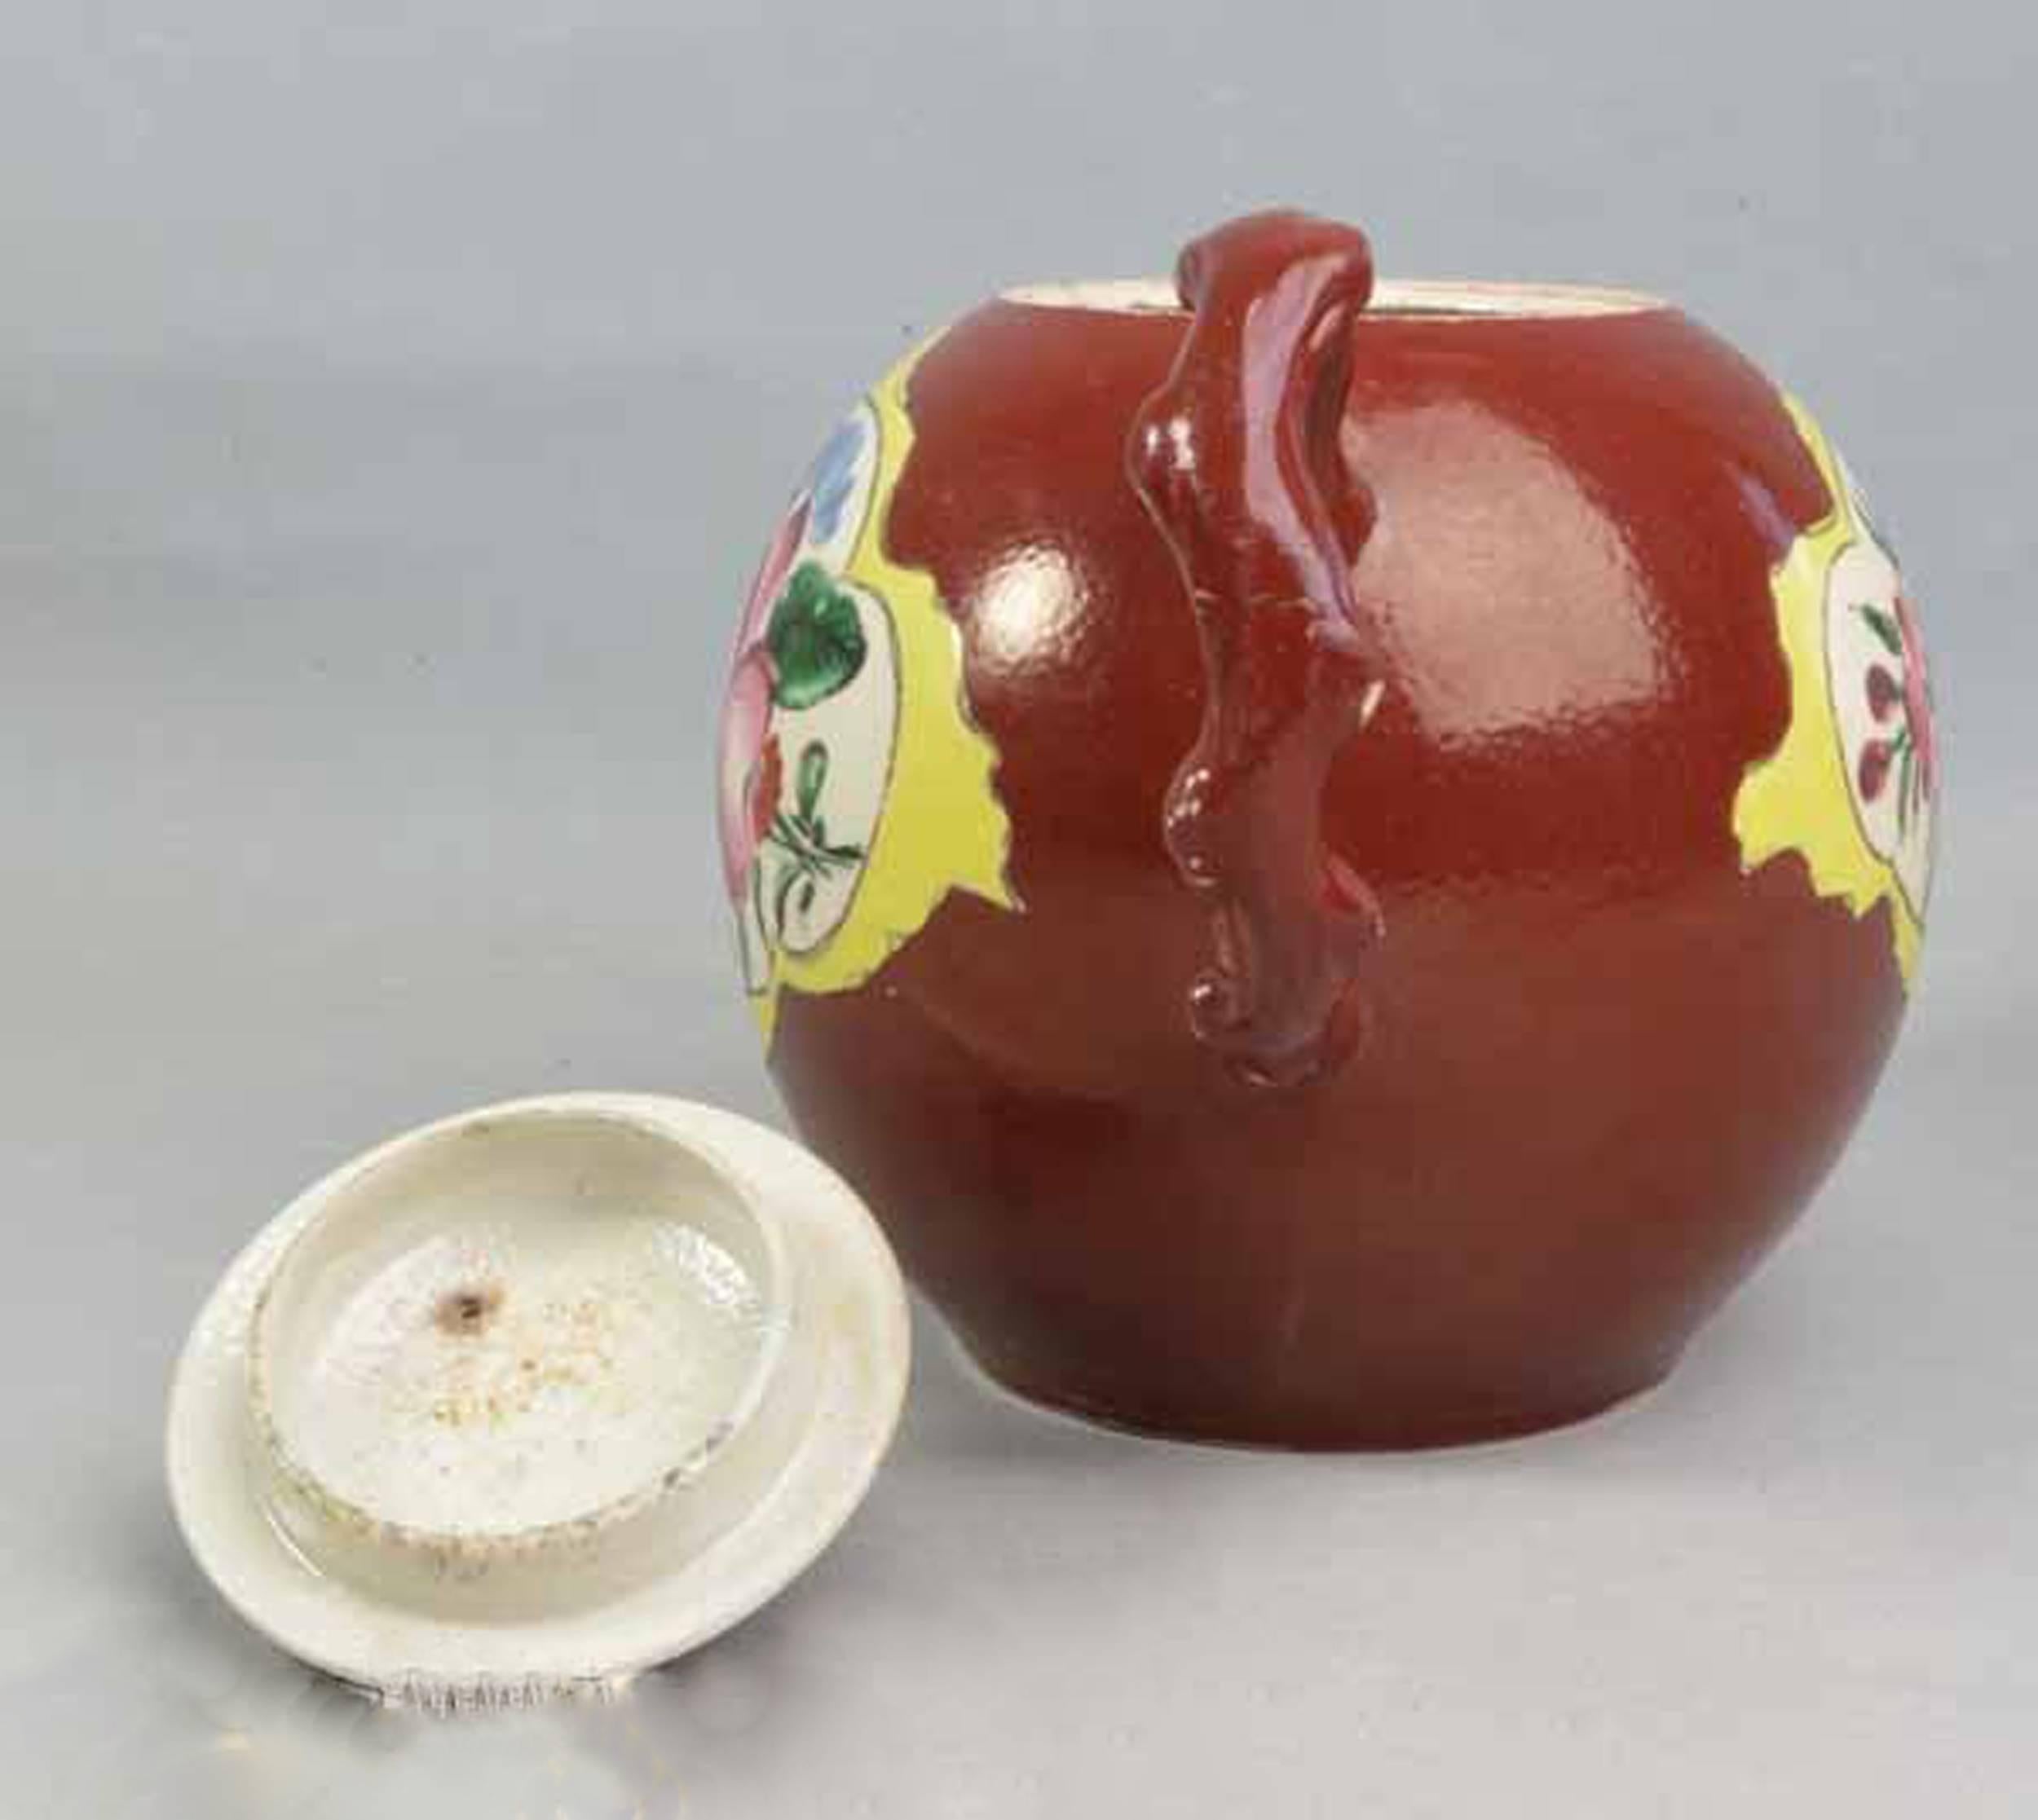 Plum red-ground saltglaze stoneware teapot & cover, 
circa 1760.

The teapot with crabstock handle and spout has one of the rarest ground colors to be found in saltglaze stoneware. Each side is painted with naturalistic flowers within a yellow